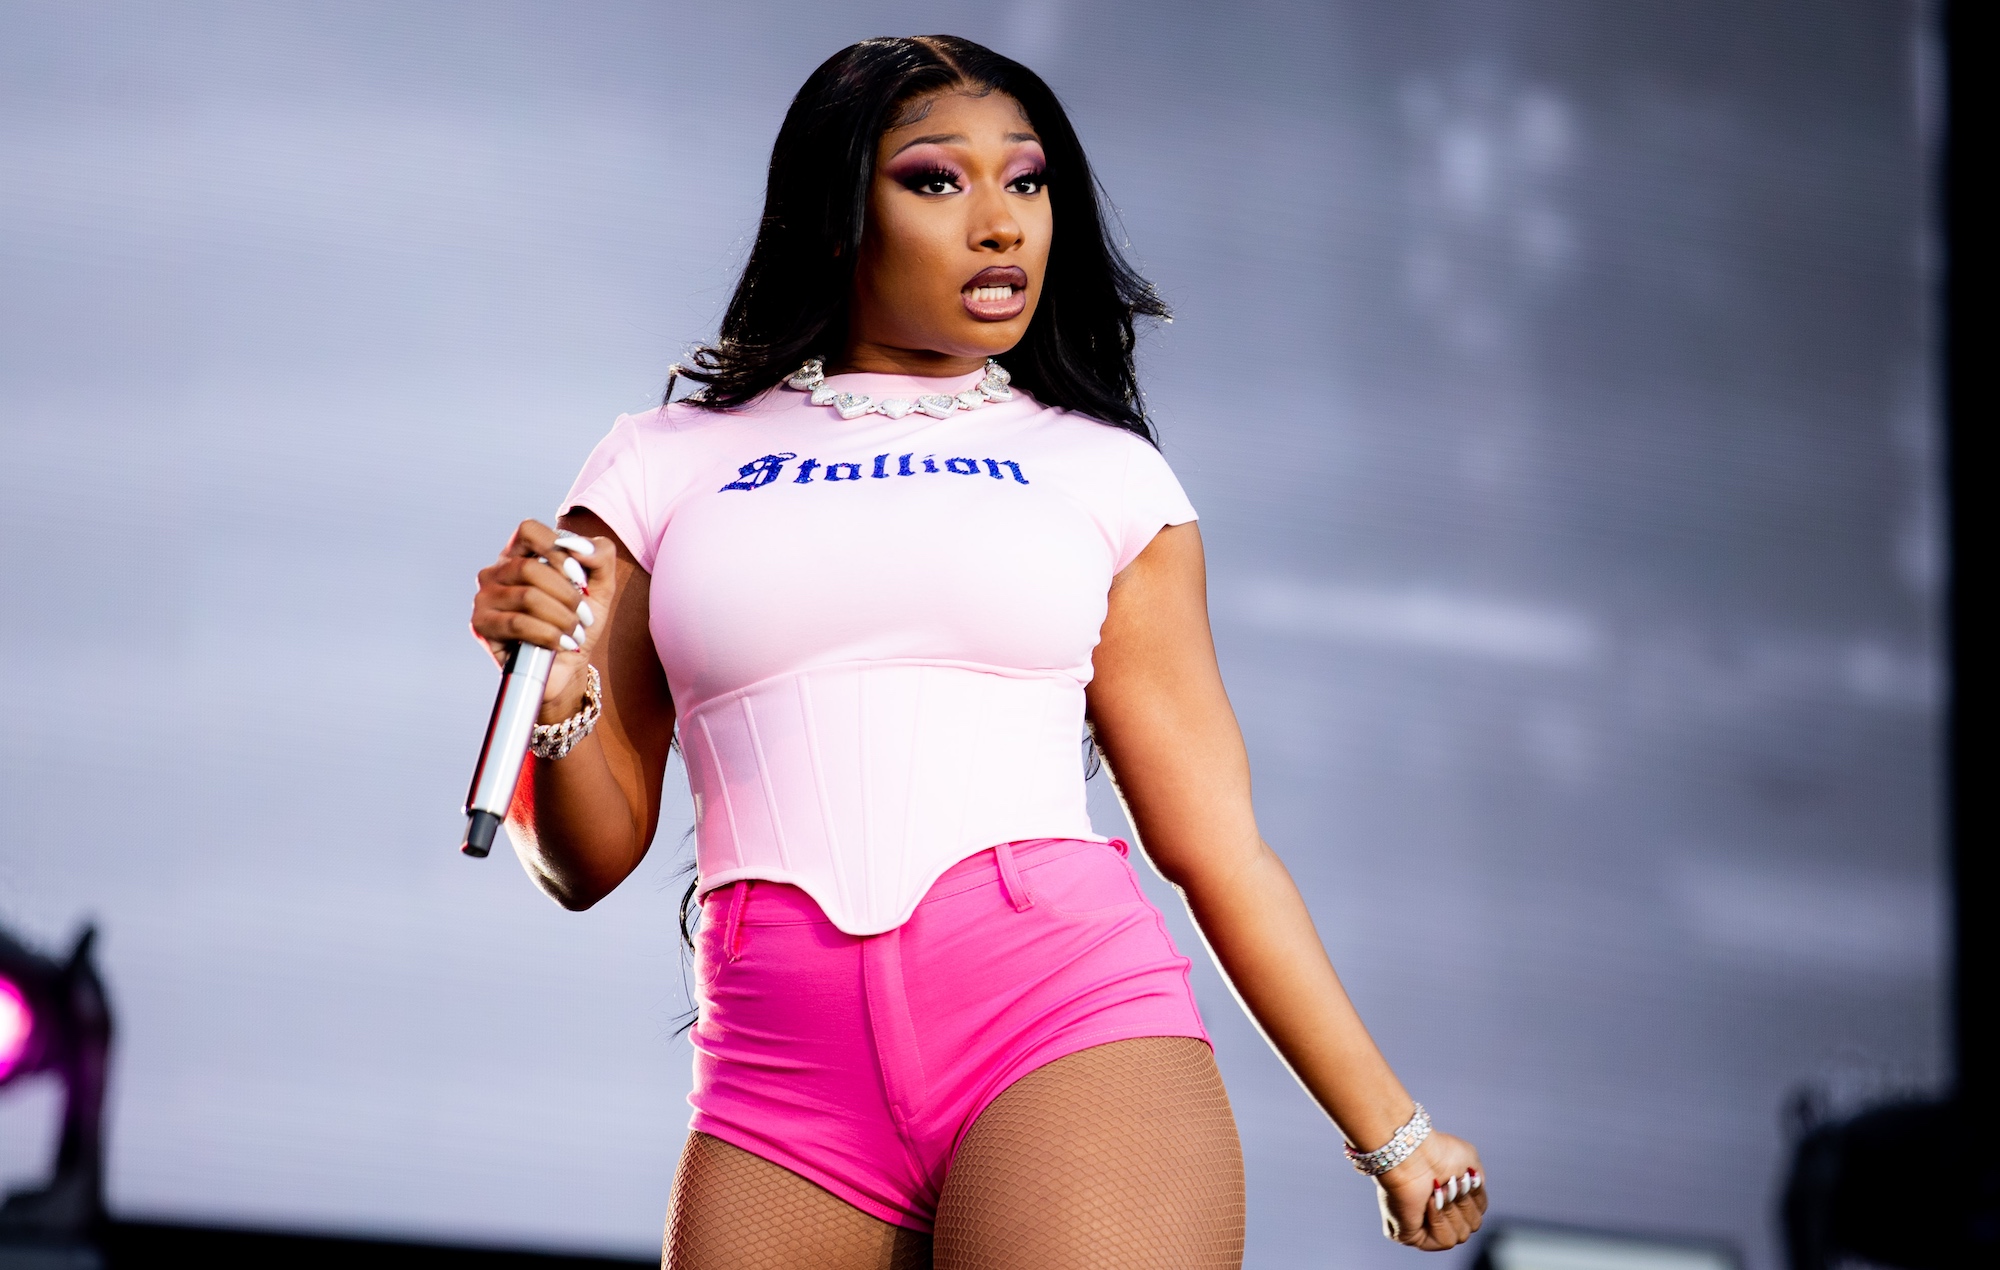 Megan Thee Stallion wearing a pink outfit and holding a mic